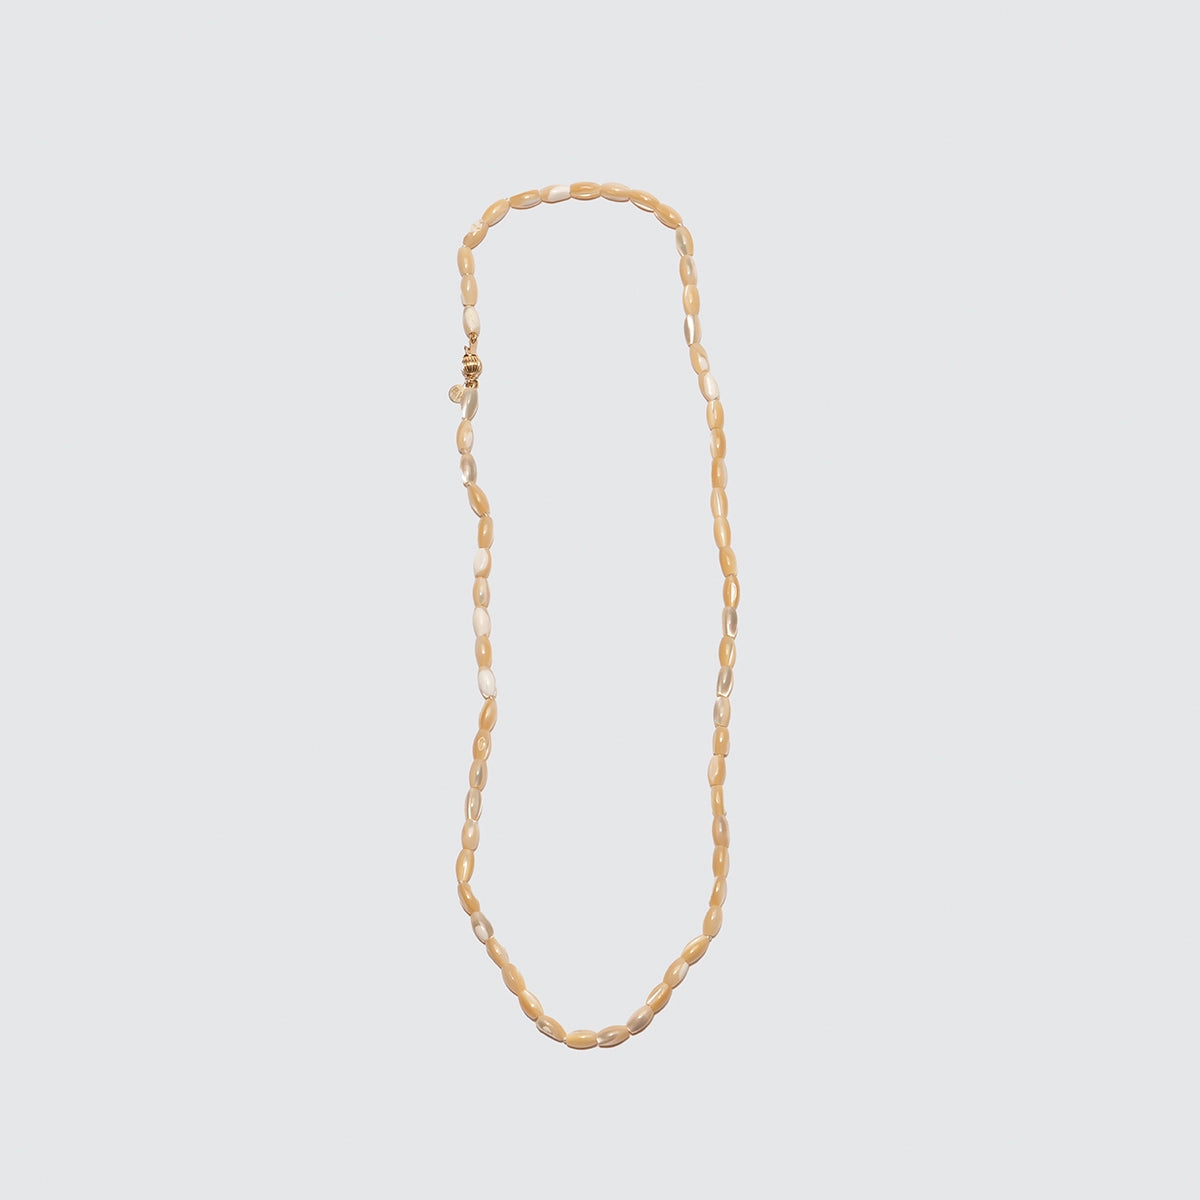 OVAL MOTHER OF PEARL NECKLACE